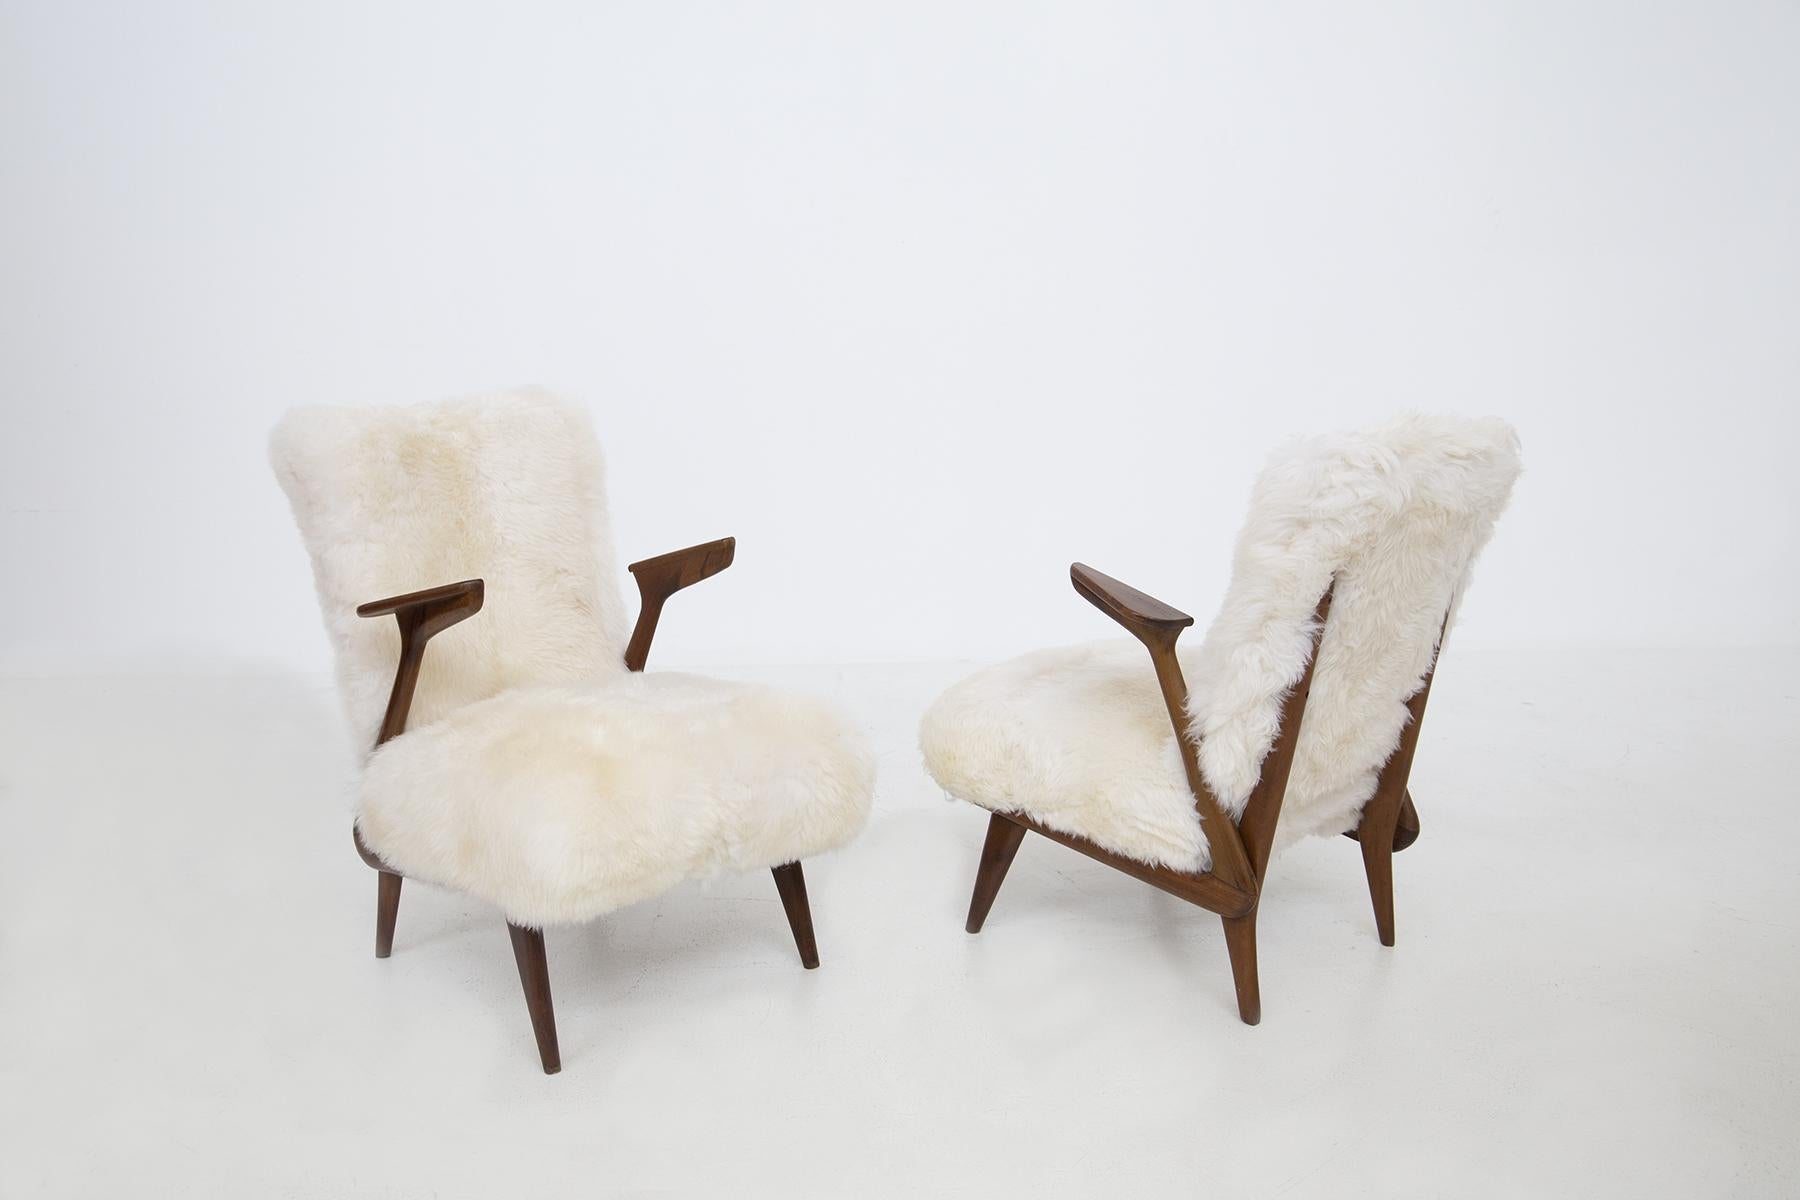 Elegant pair of Italian armchairs attributed to Giuseppe Scapinelli from the 1950s. The armchairs are made of walnut wood. The armchairs have a linear and anthropomorphic shape where the armrest vibrates towards each other with triangular shape .